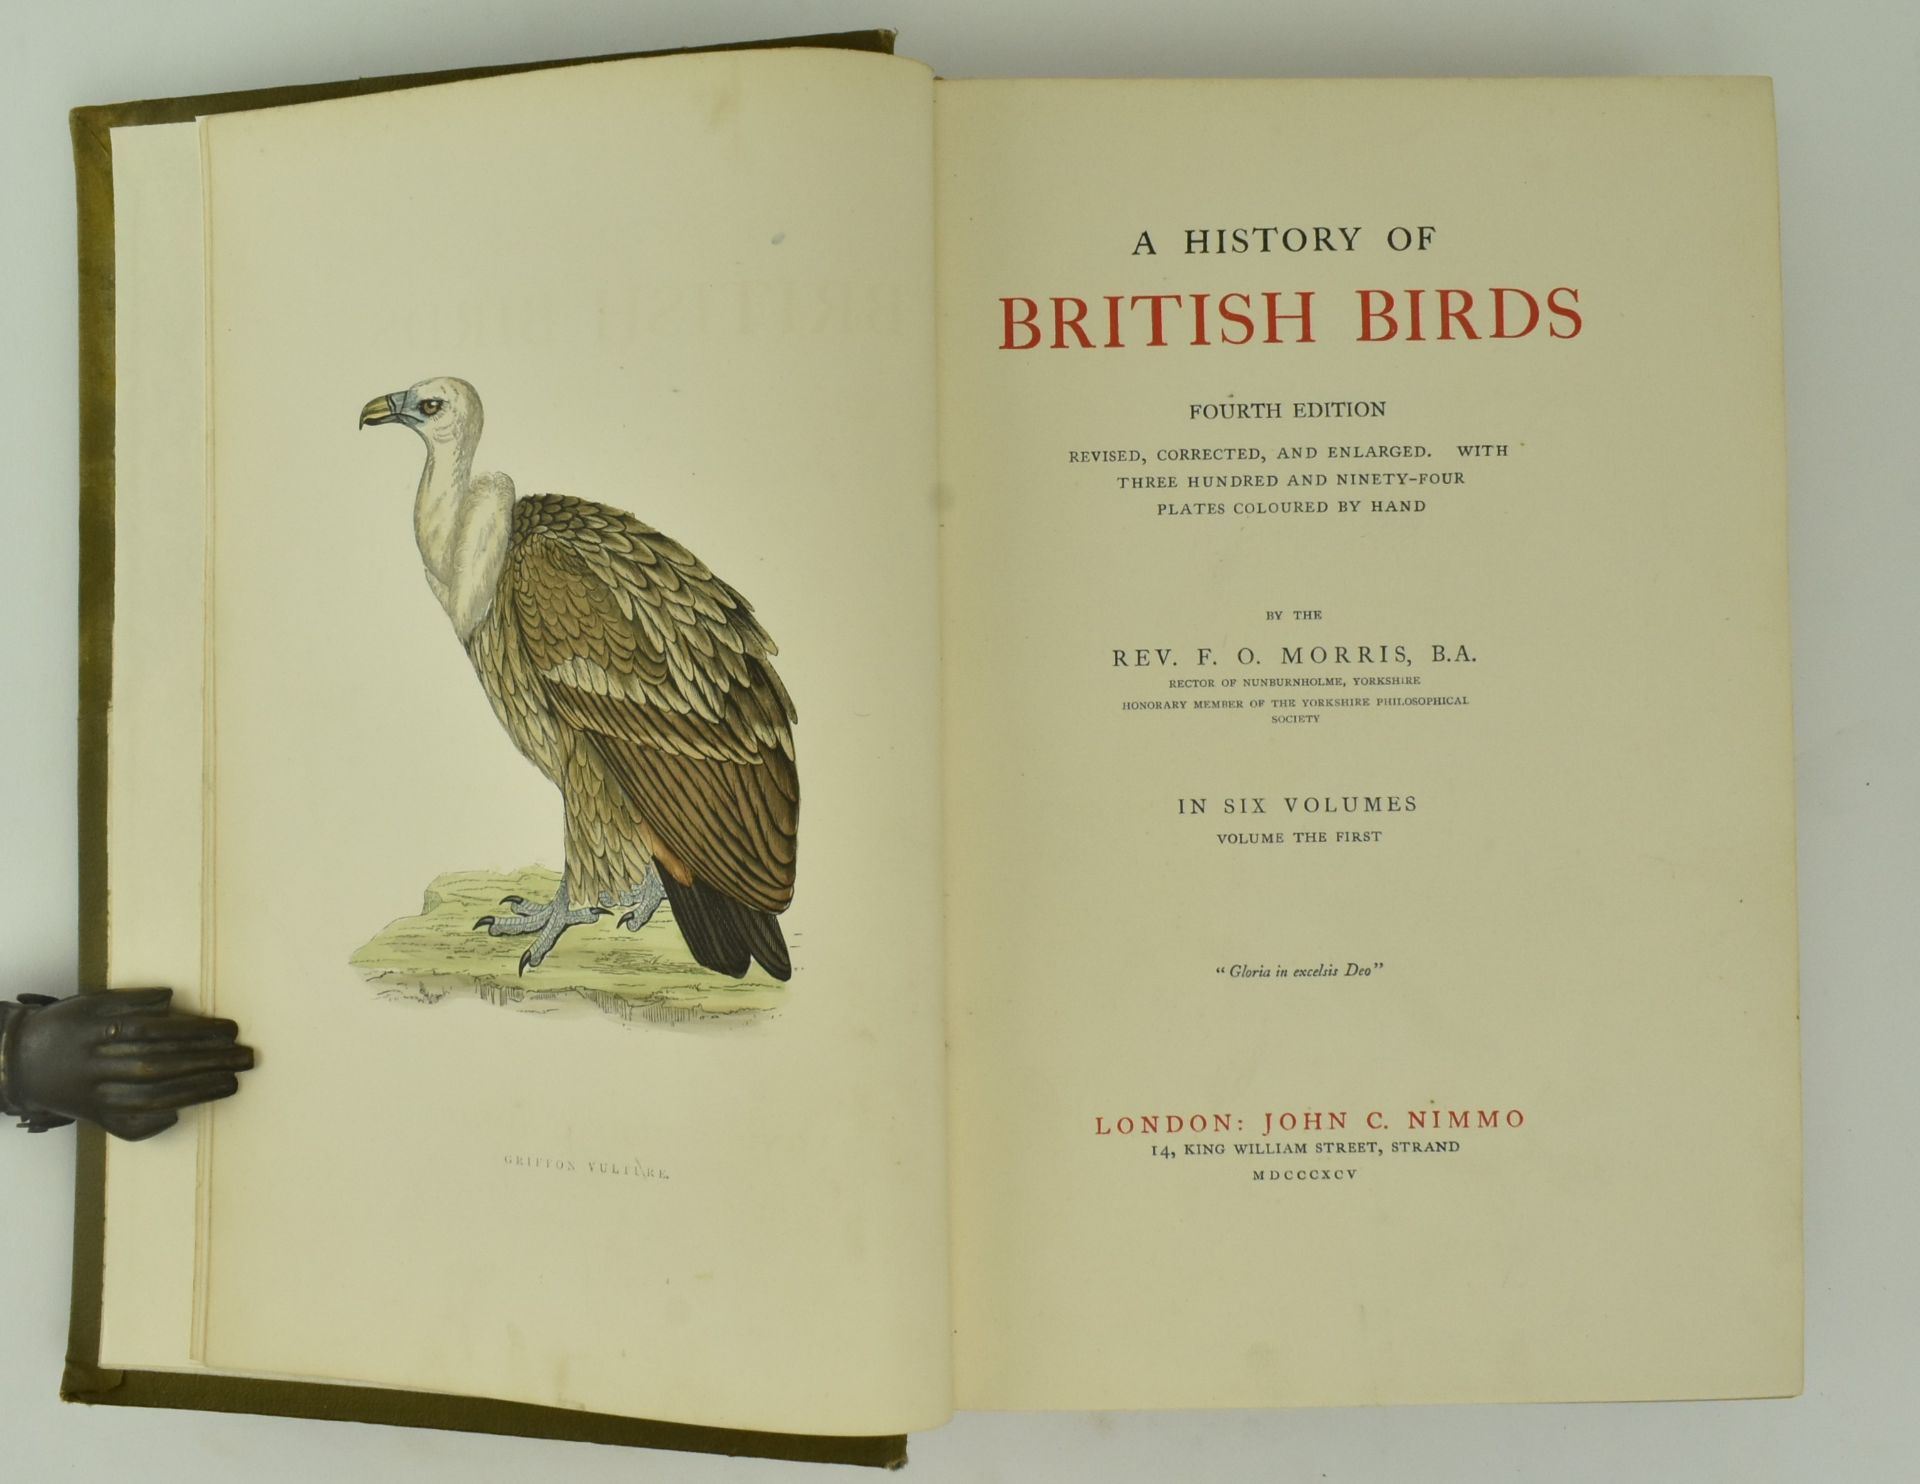 MORRIS, F. O. A HISTORY OF BRITISH BIRDS, 4TH ED IN SIX VOLUMES - Image 3 of 8